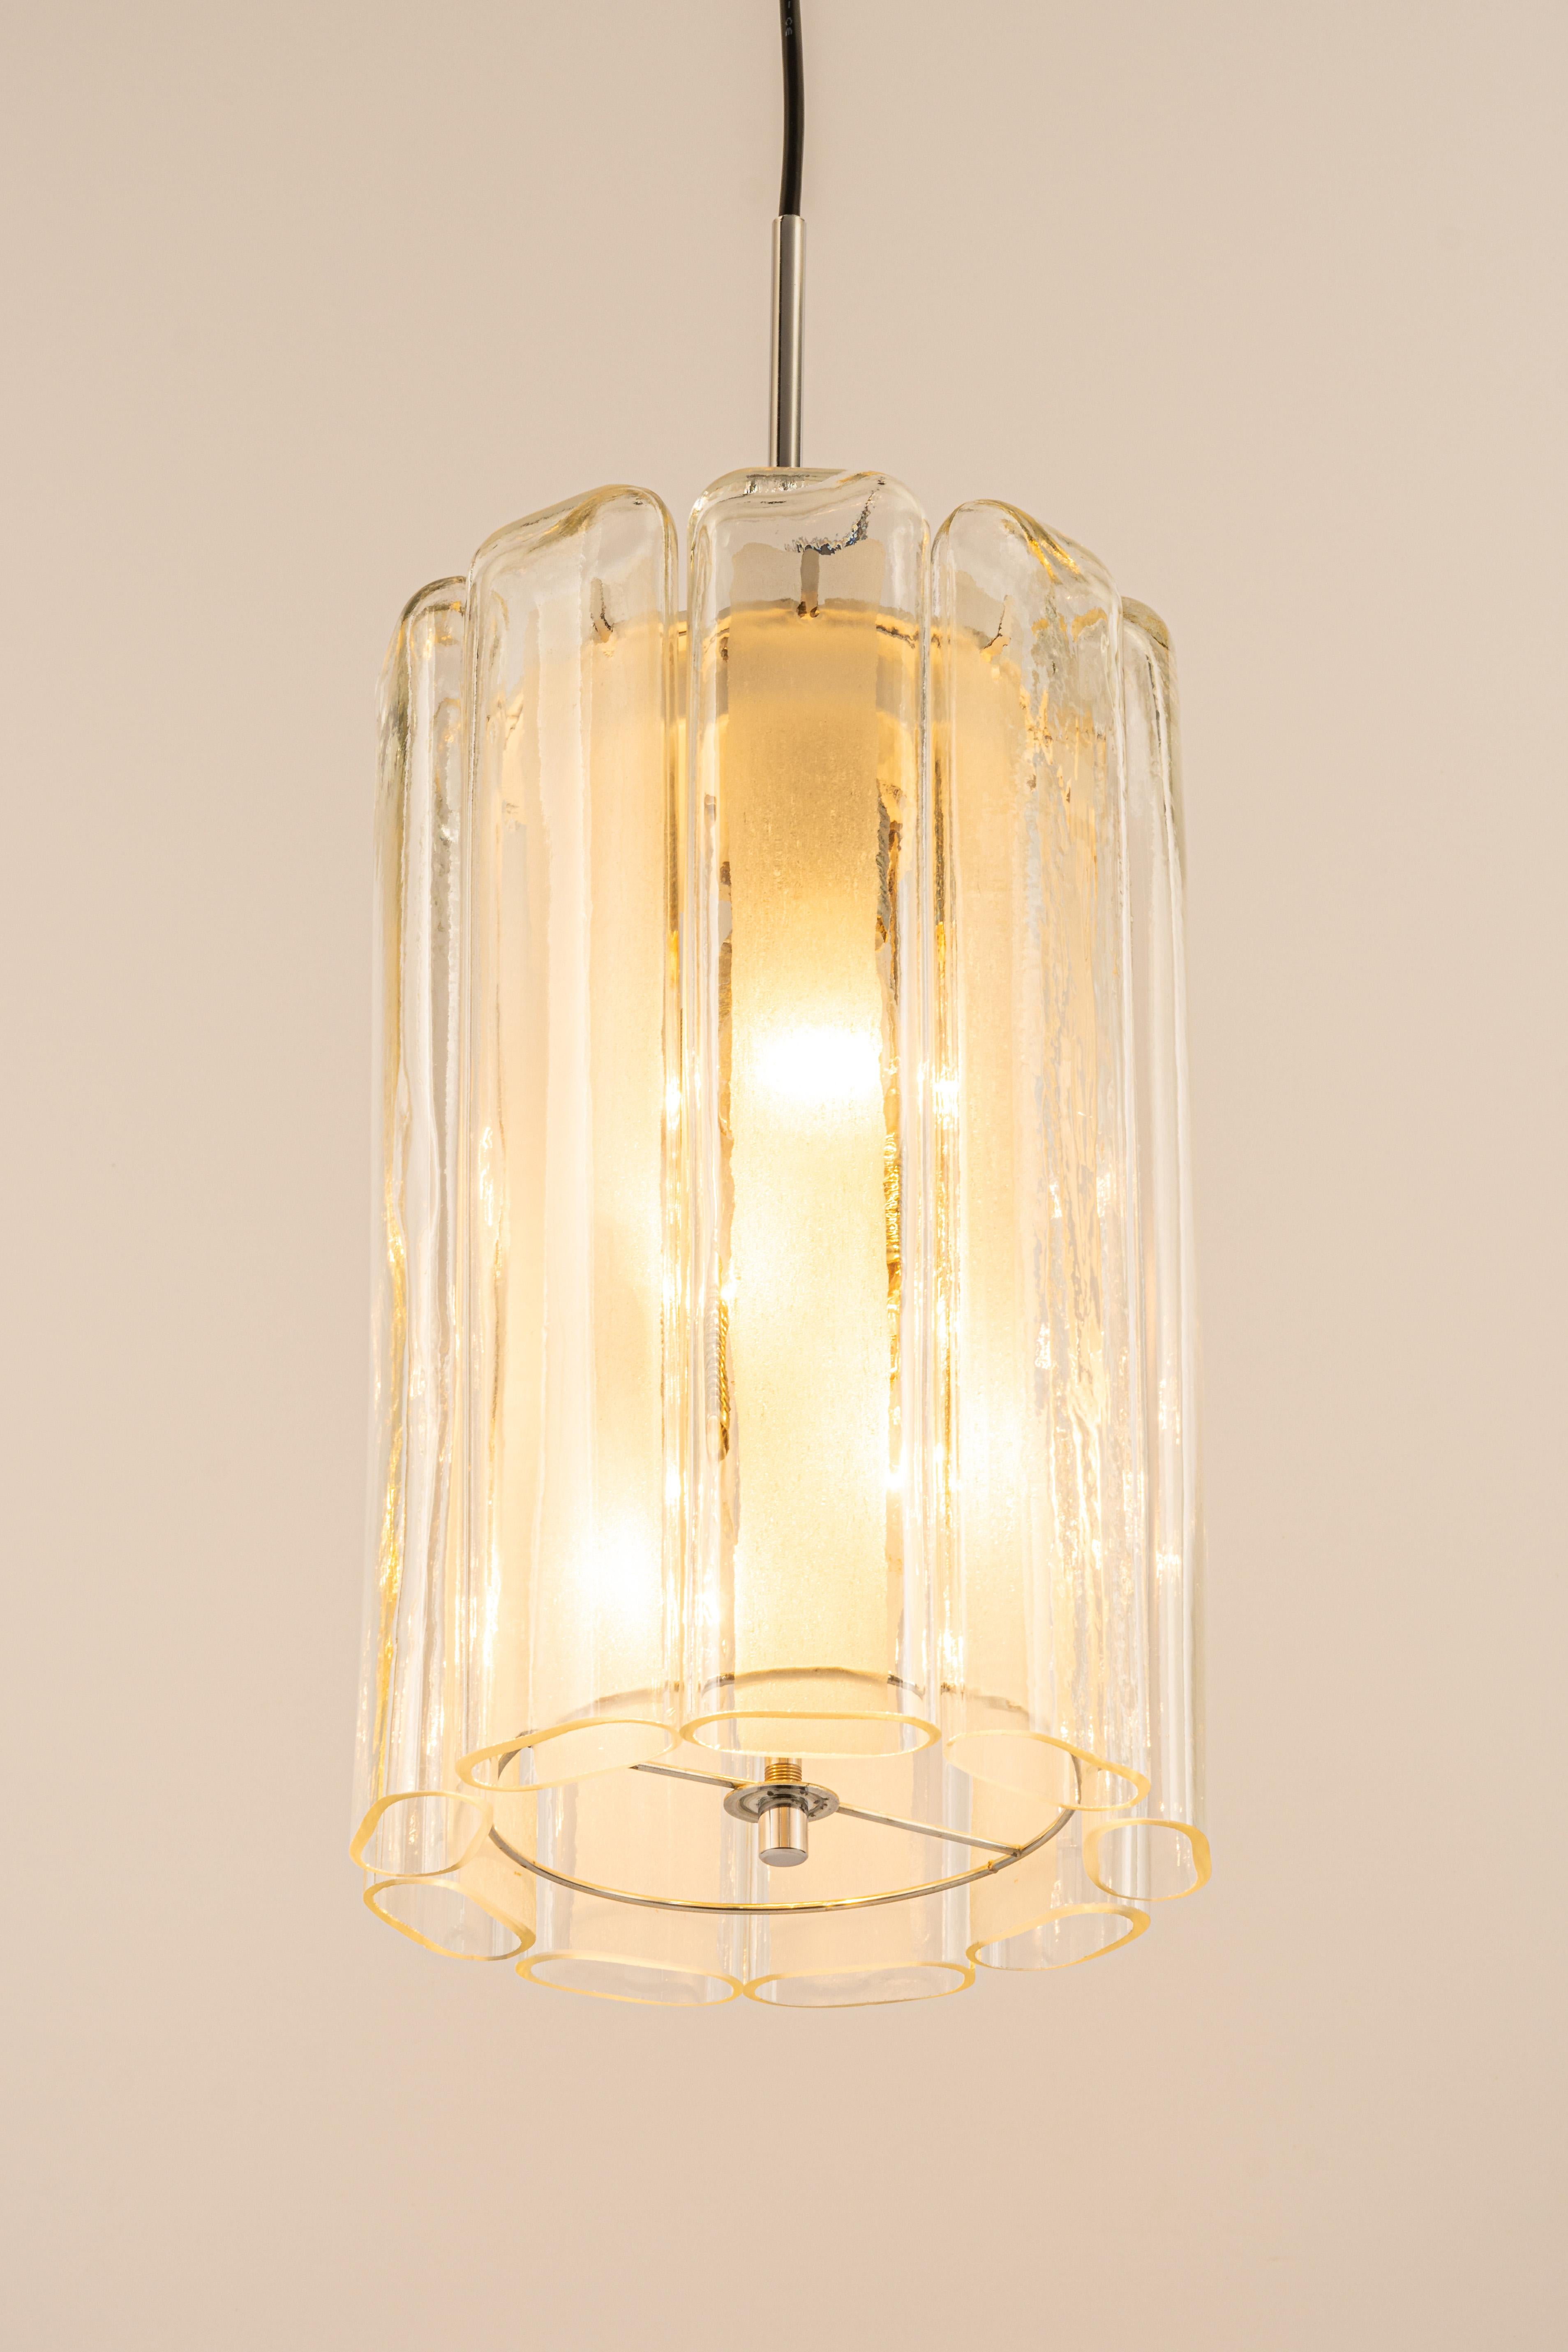 1 of 6 Cylindrical Pendant Fixture with Crystal Glass by Doria, Germany, 1970s For Sale 2